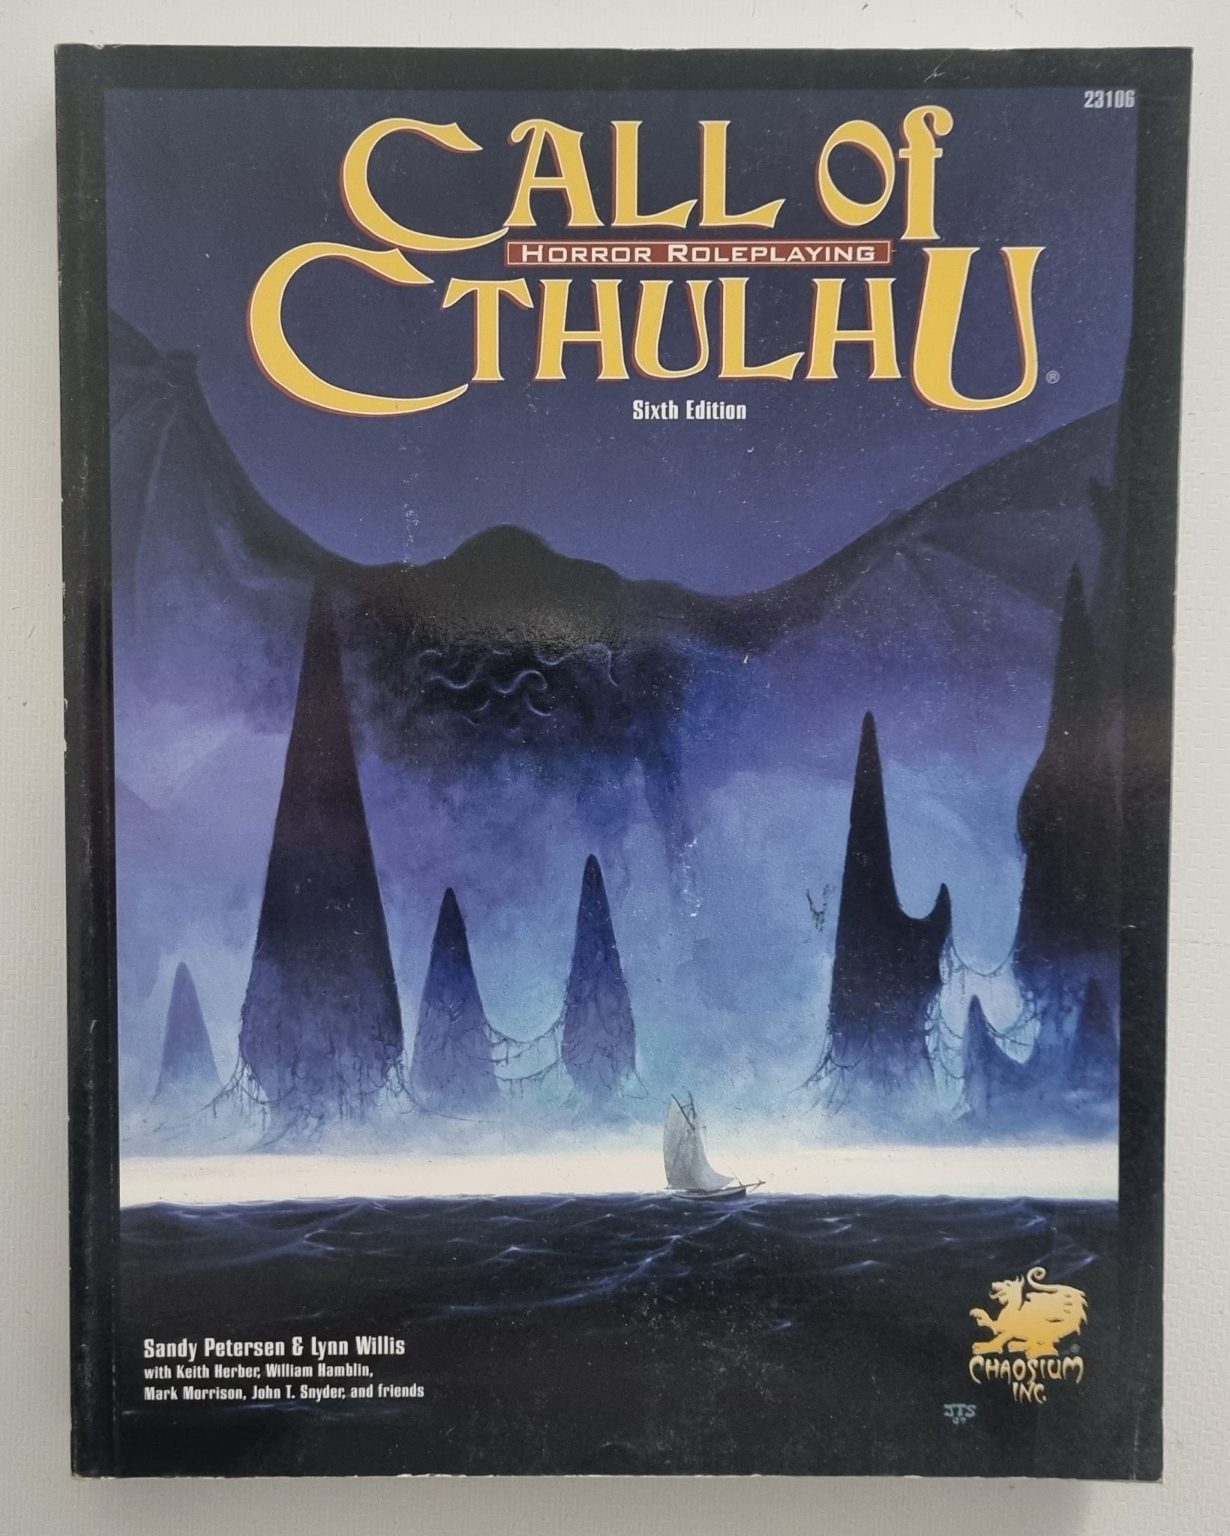 Call of Cthulhu - Horror Roleplaying - 6th Edition